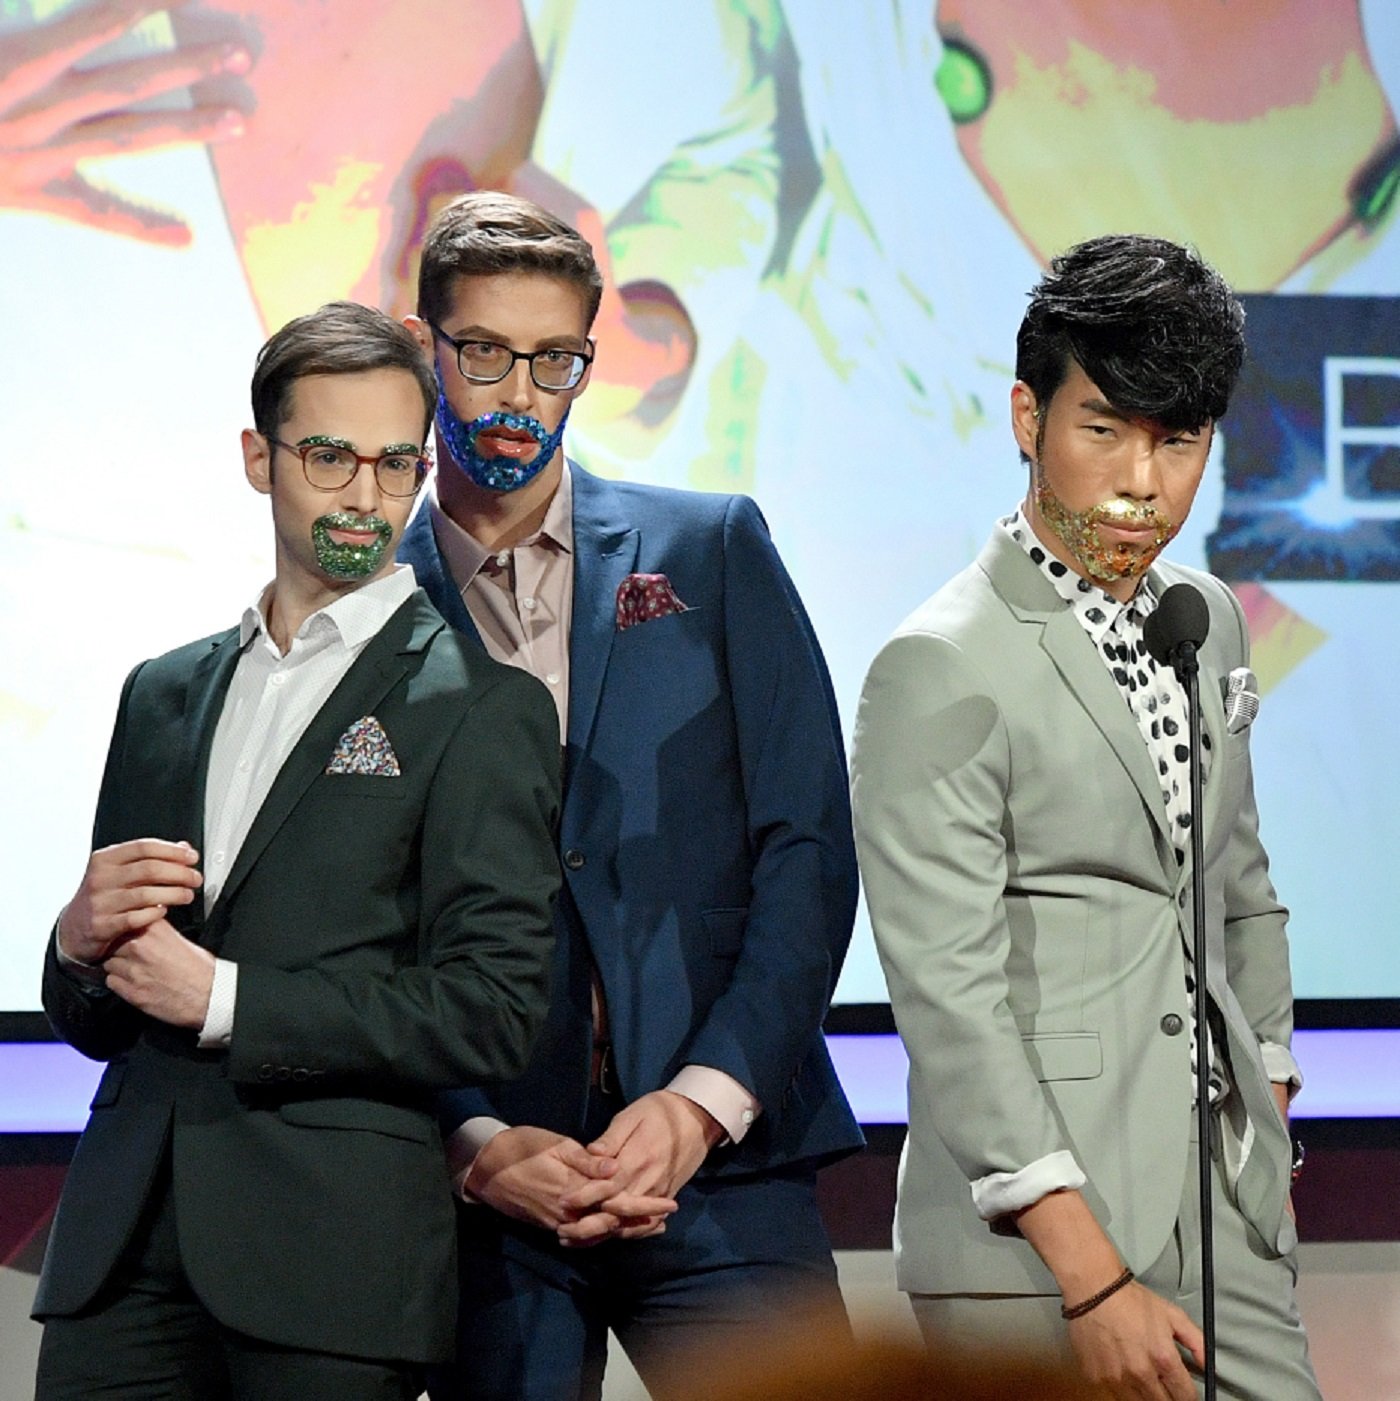 Zach Kornfeld, Keith Habersberger, and Eugene Lee Yang of The Try Guys speak onstage during the 6th annual Streamy Awards